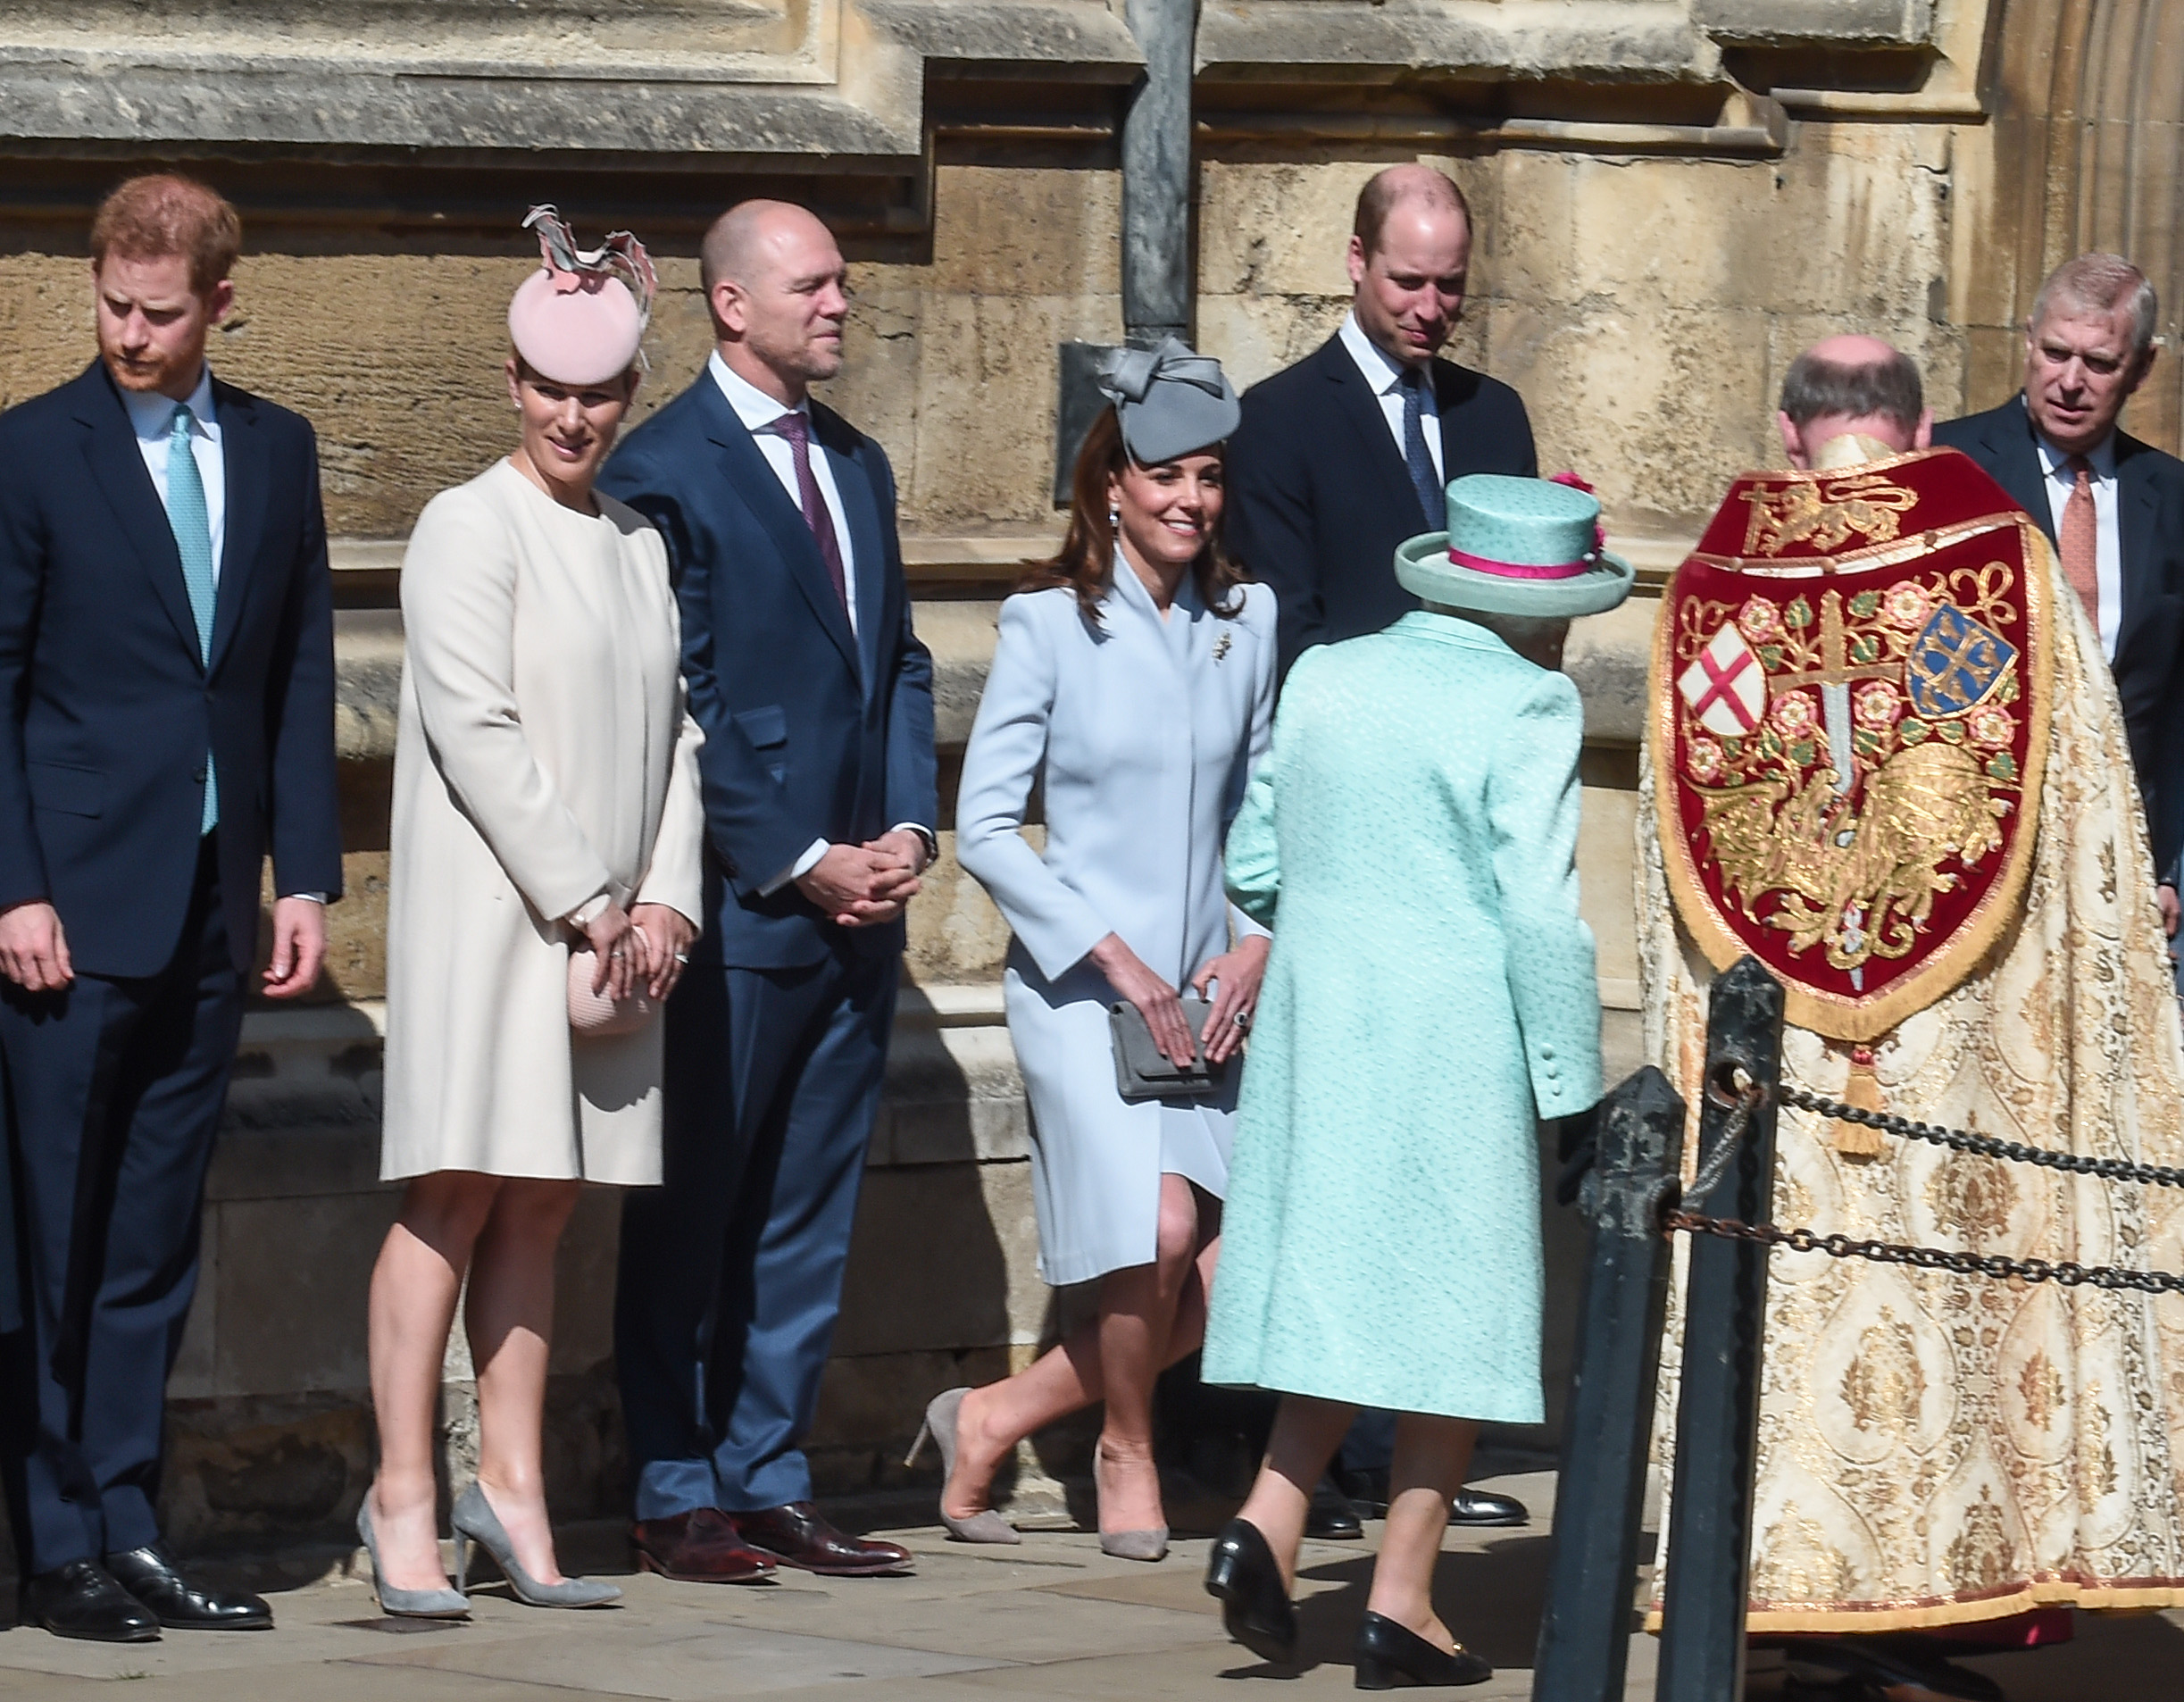 WINDSOR, ENGLAND - APRIL 21: (L-R) Prince Harry, Duke of Sussex, Zara Tindall, Mike Tindall, Catherine, Duchess of Cambridge and Prince William, Duke of Cambridge greet Queen Elizabeth II as she arrives for the Easter Sunday service at St George's Chapel on April 21, 2019 in Windsor, England. (Photo by Eamonn M. McCormack/Getty Images) (Eamonn M. McCormack—Getty Images)